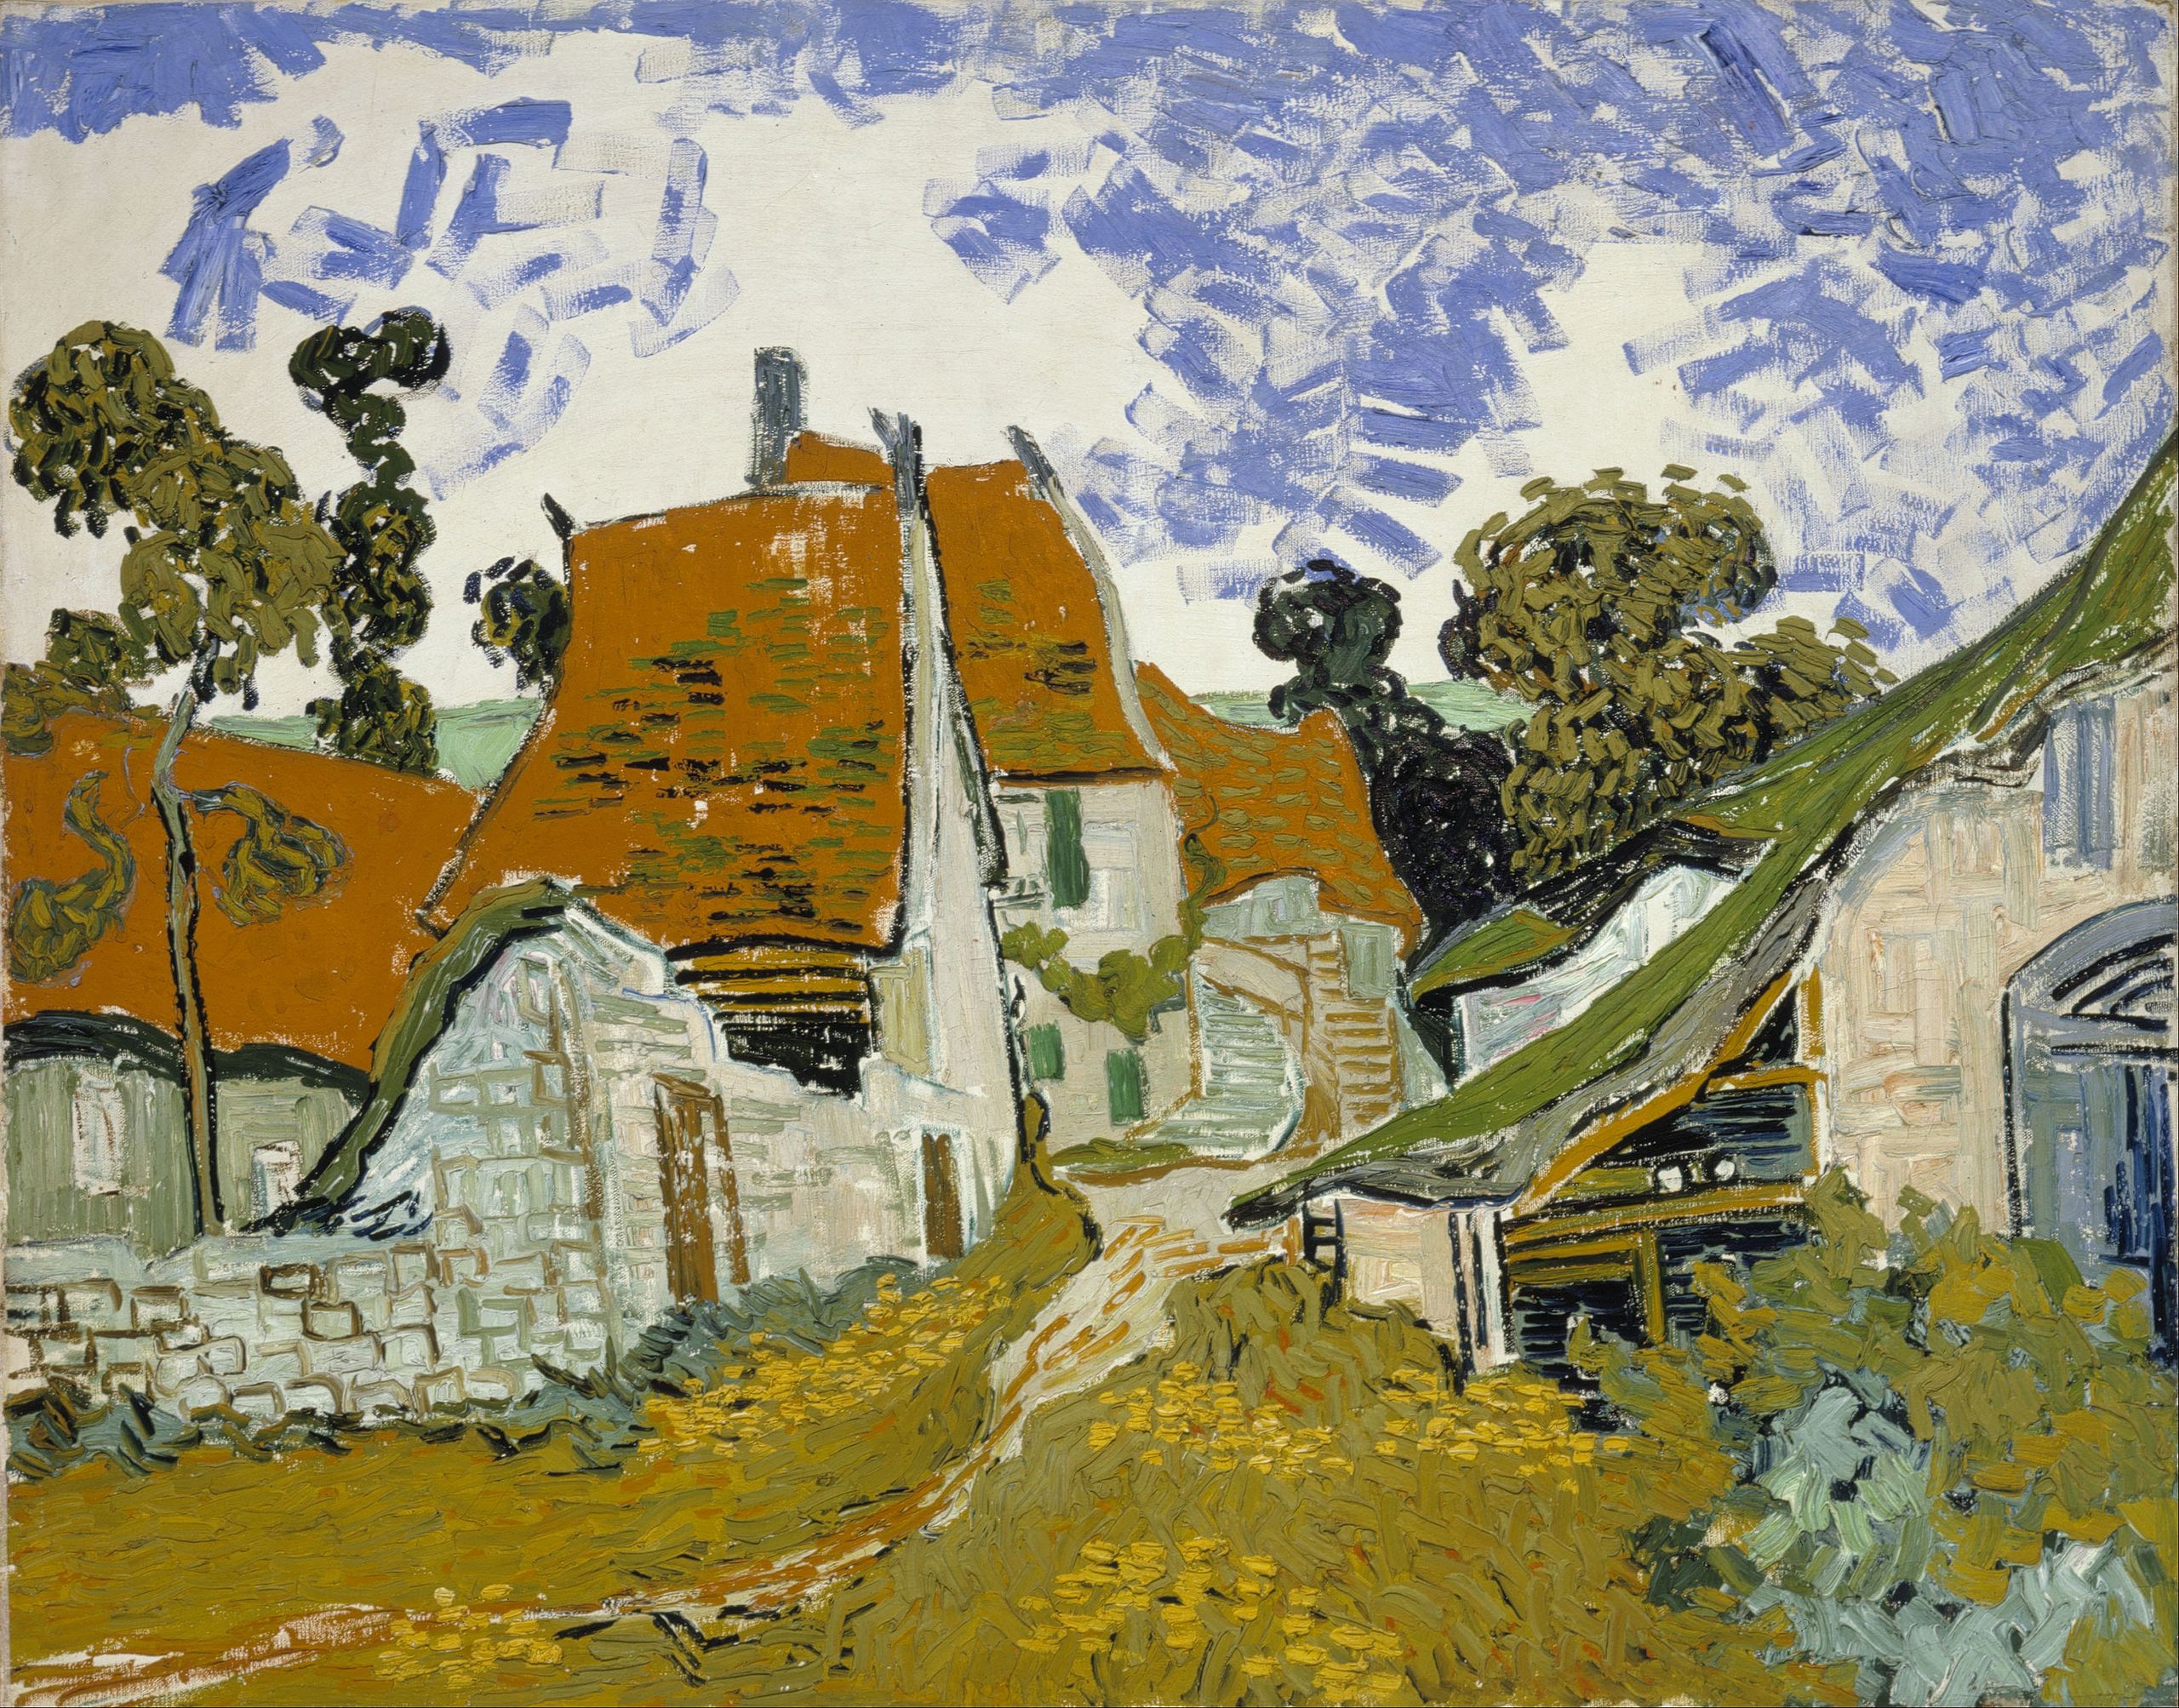 Street in Auvers-sur-Oise by Vincent van Gogh - 1890 - 92.5 x 73.5 cm Finnish National Gallery